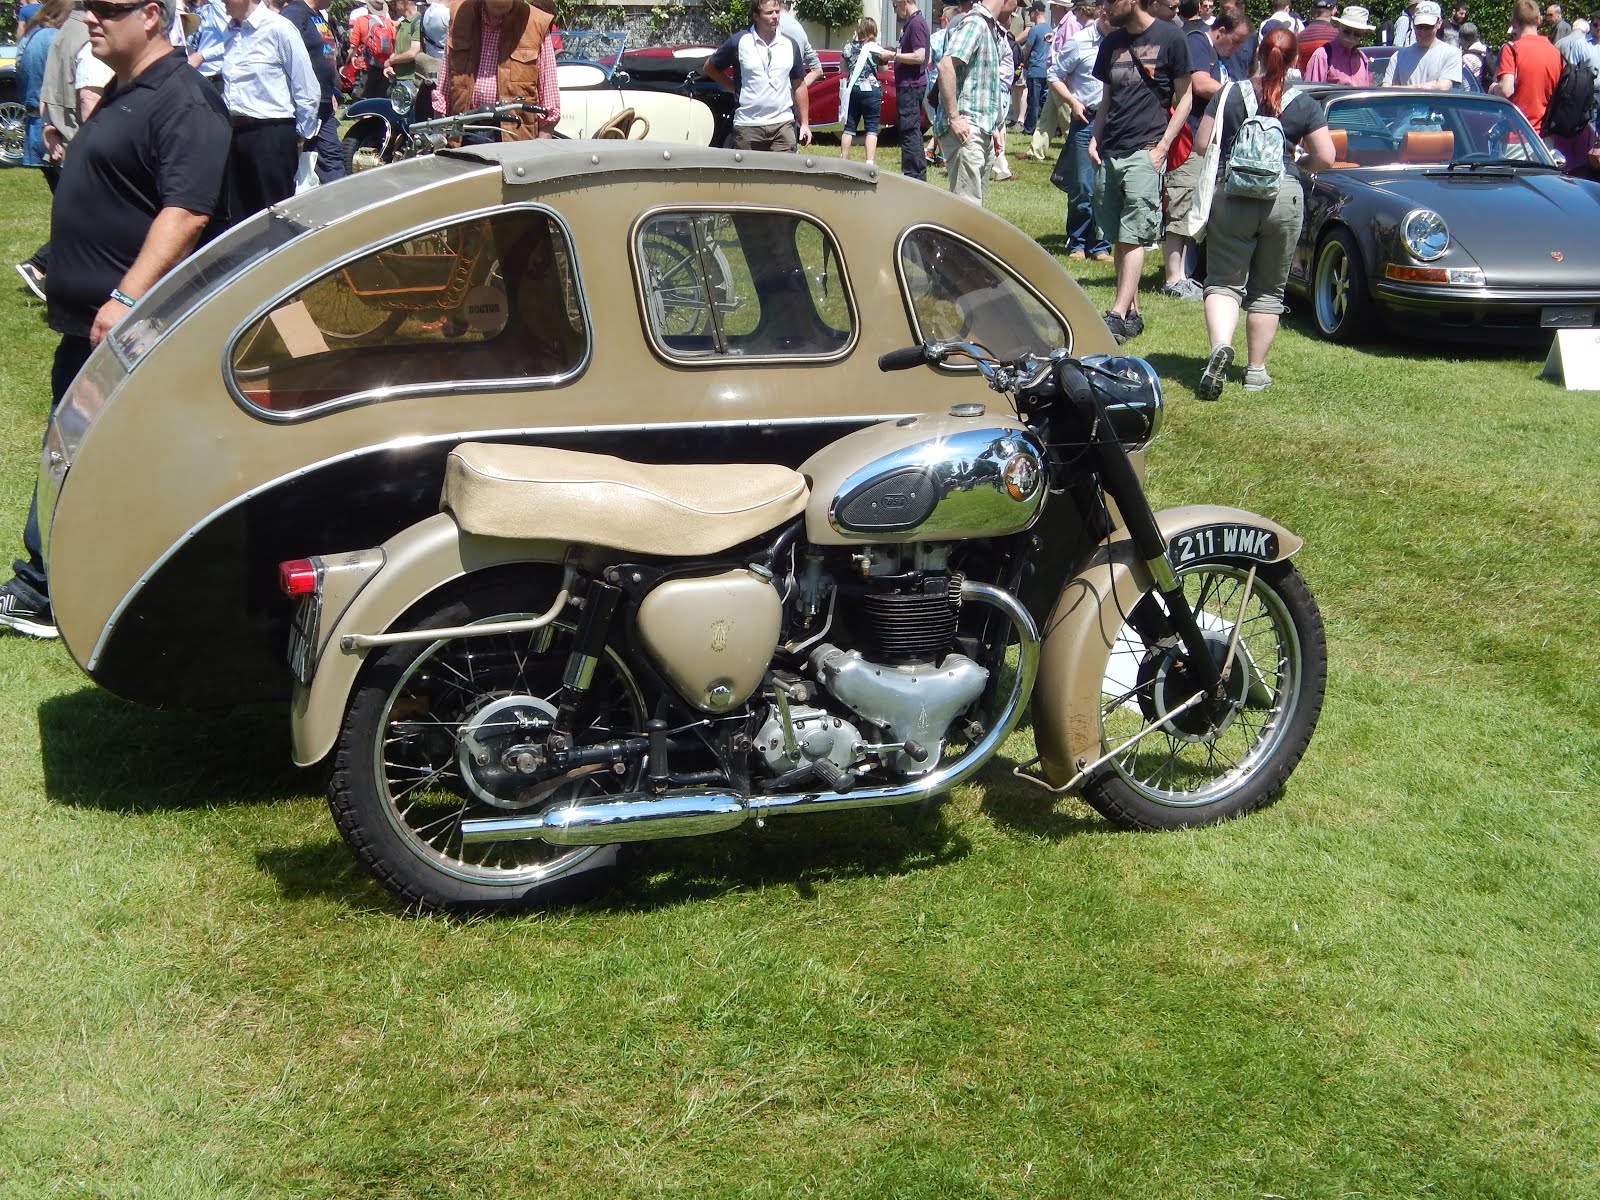 Remember the BSA Gold Flash?